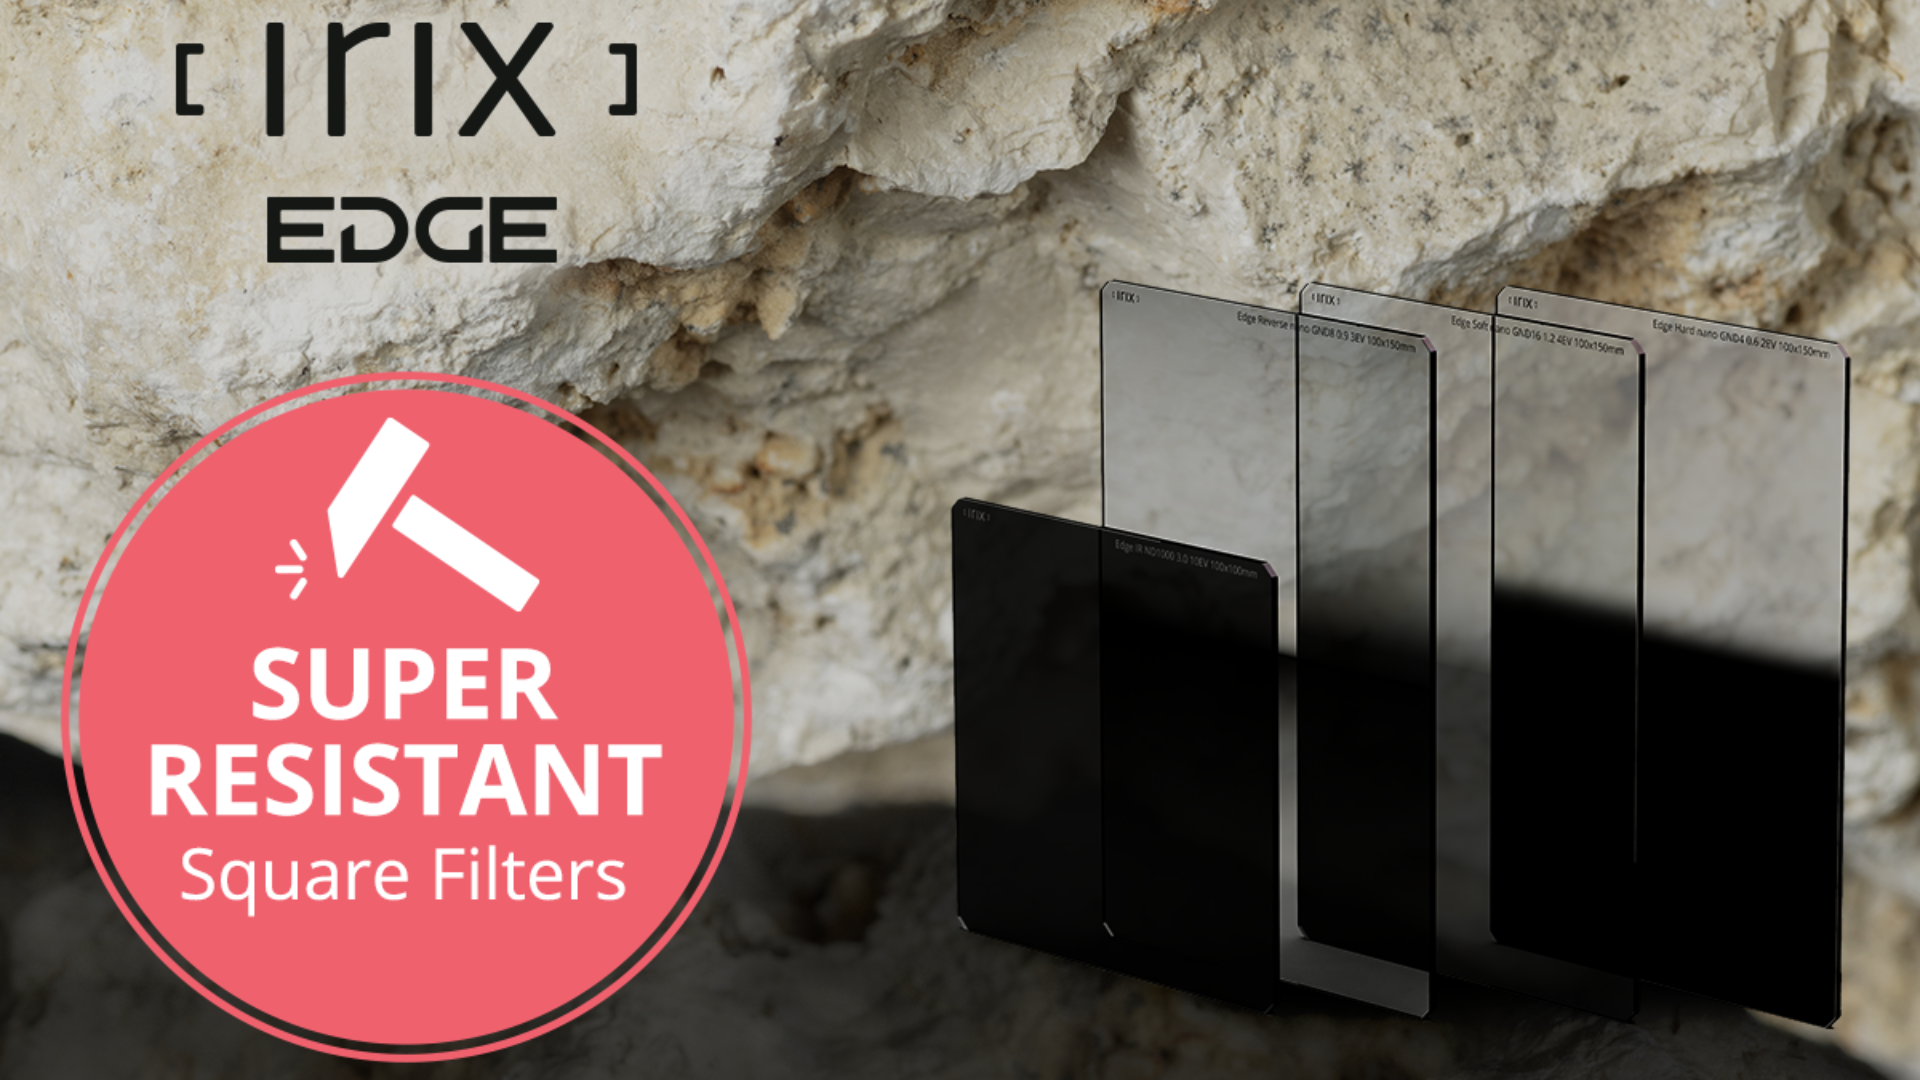 Irix Edge square filters now available in Super Resistance (SR) version